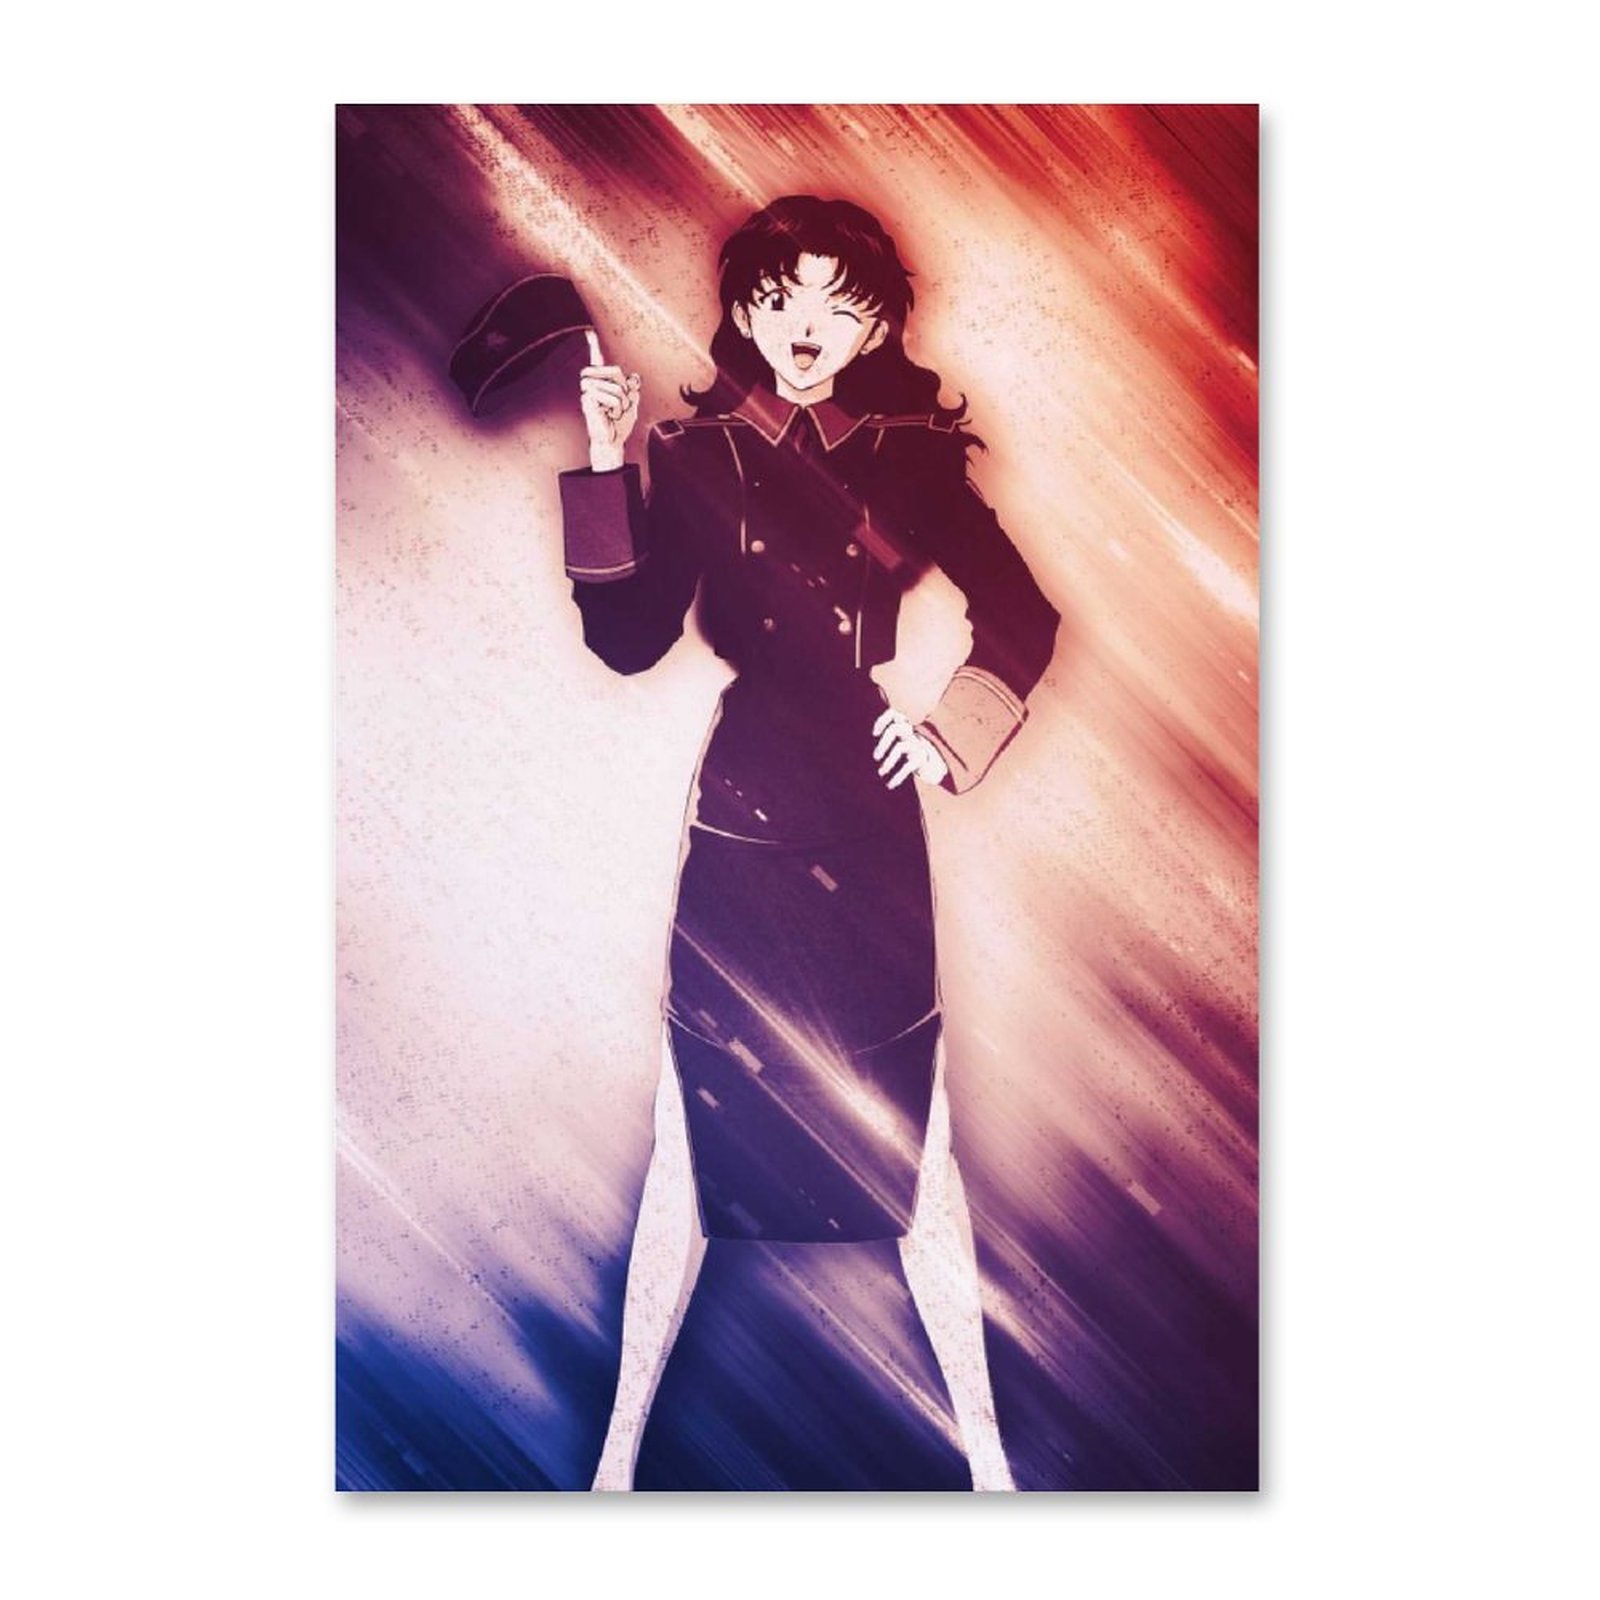 Anime Misato Evangelion GirlCanvas Painting Wall Art Posters and Prints Wall Pictures for Living Room Decoration - Evangelion Shop